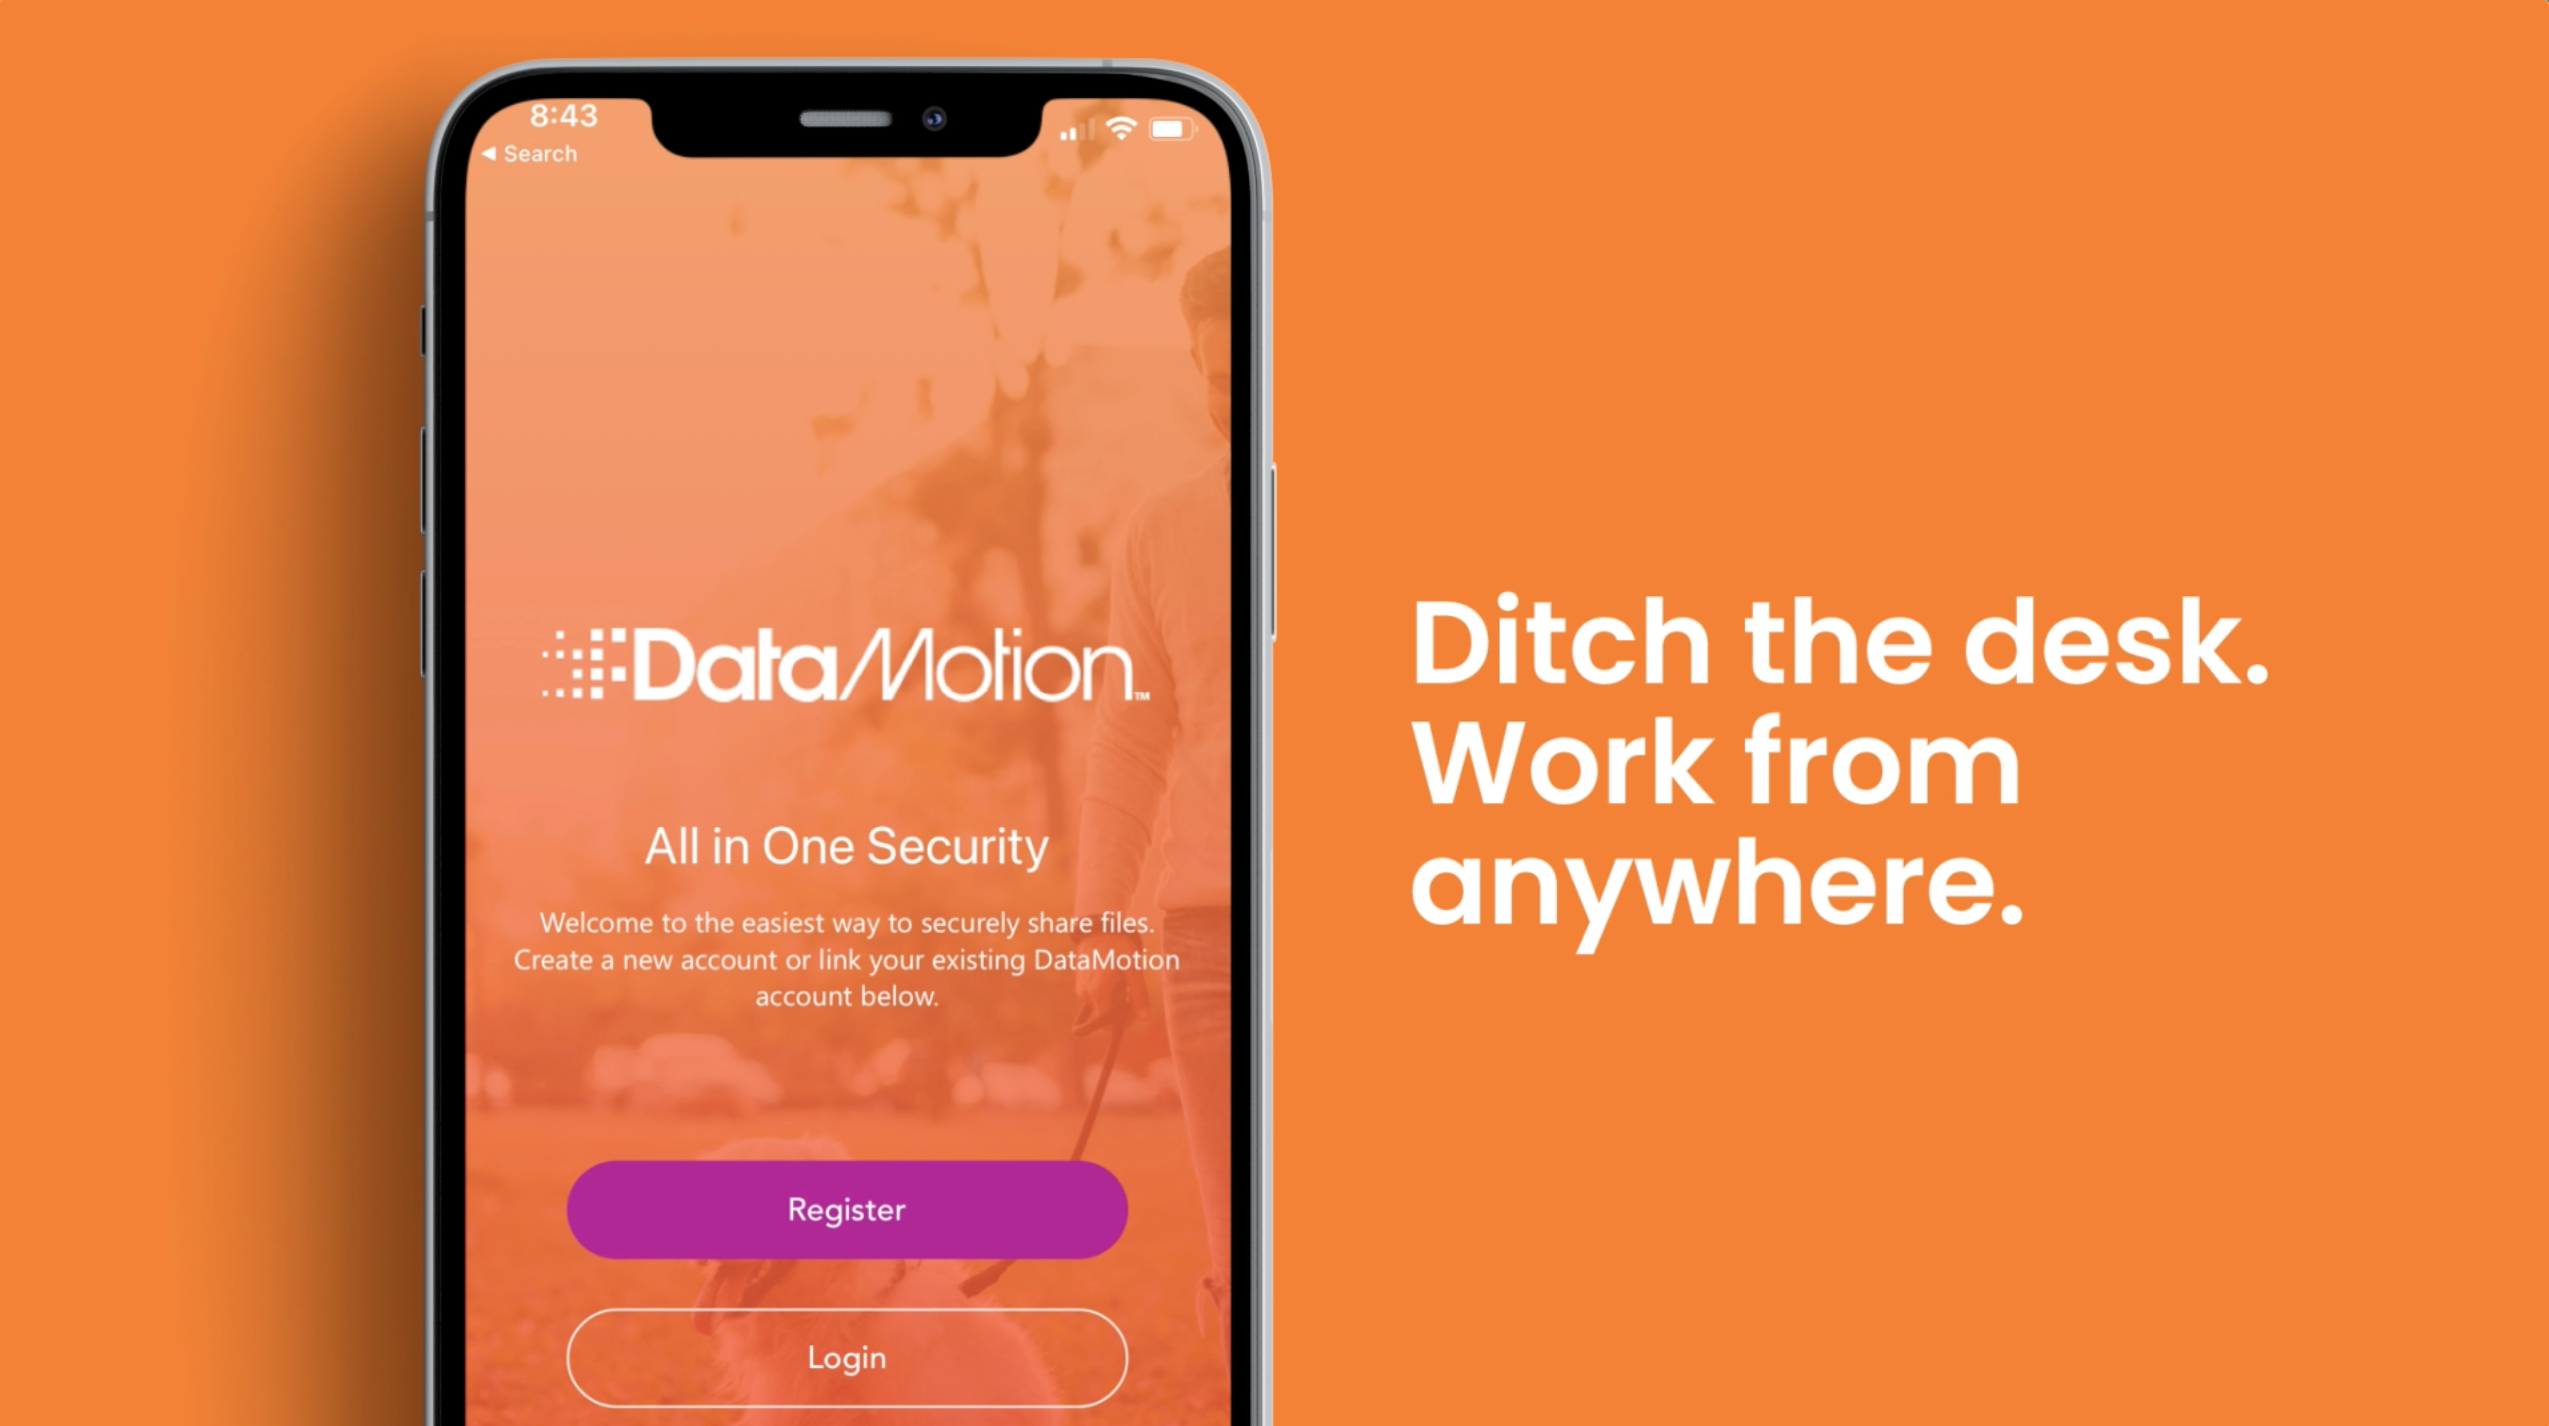 Screenshot of DataMotion mobile app video with text "Ditch the desk. Work from anywhere." to the right of a screenshot of the DataMotion app